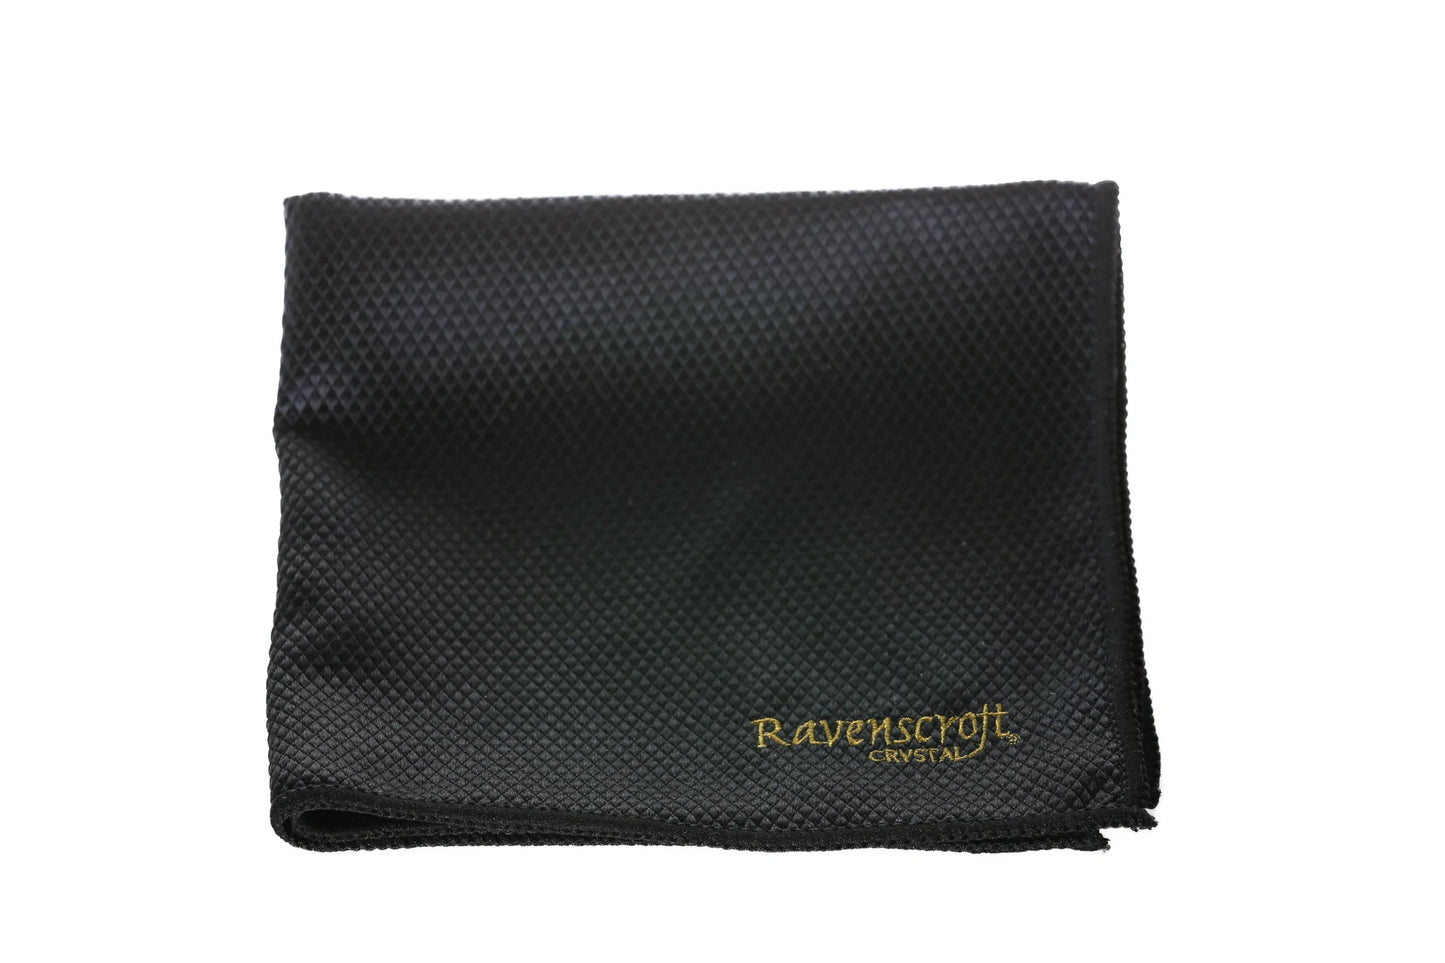 Ravenscroft INAO Type Tasting Glass (Set of 12) with Free Microfiber Cleaning Cloth TIP-29-12